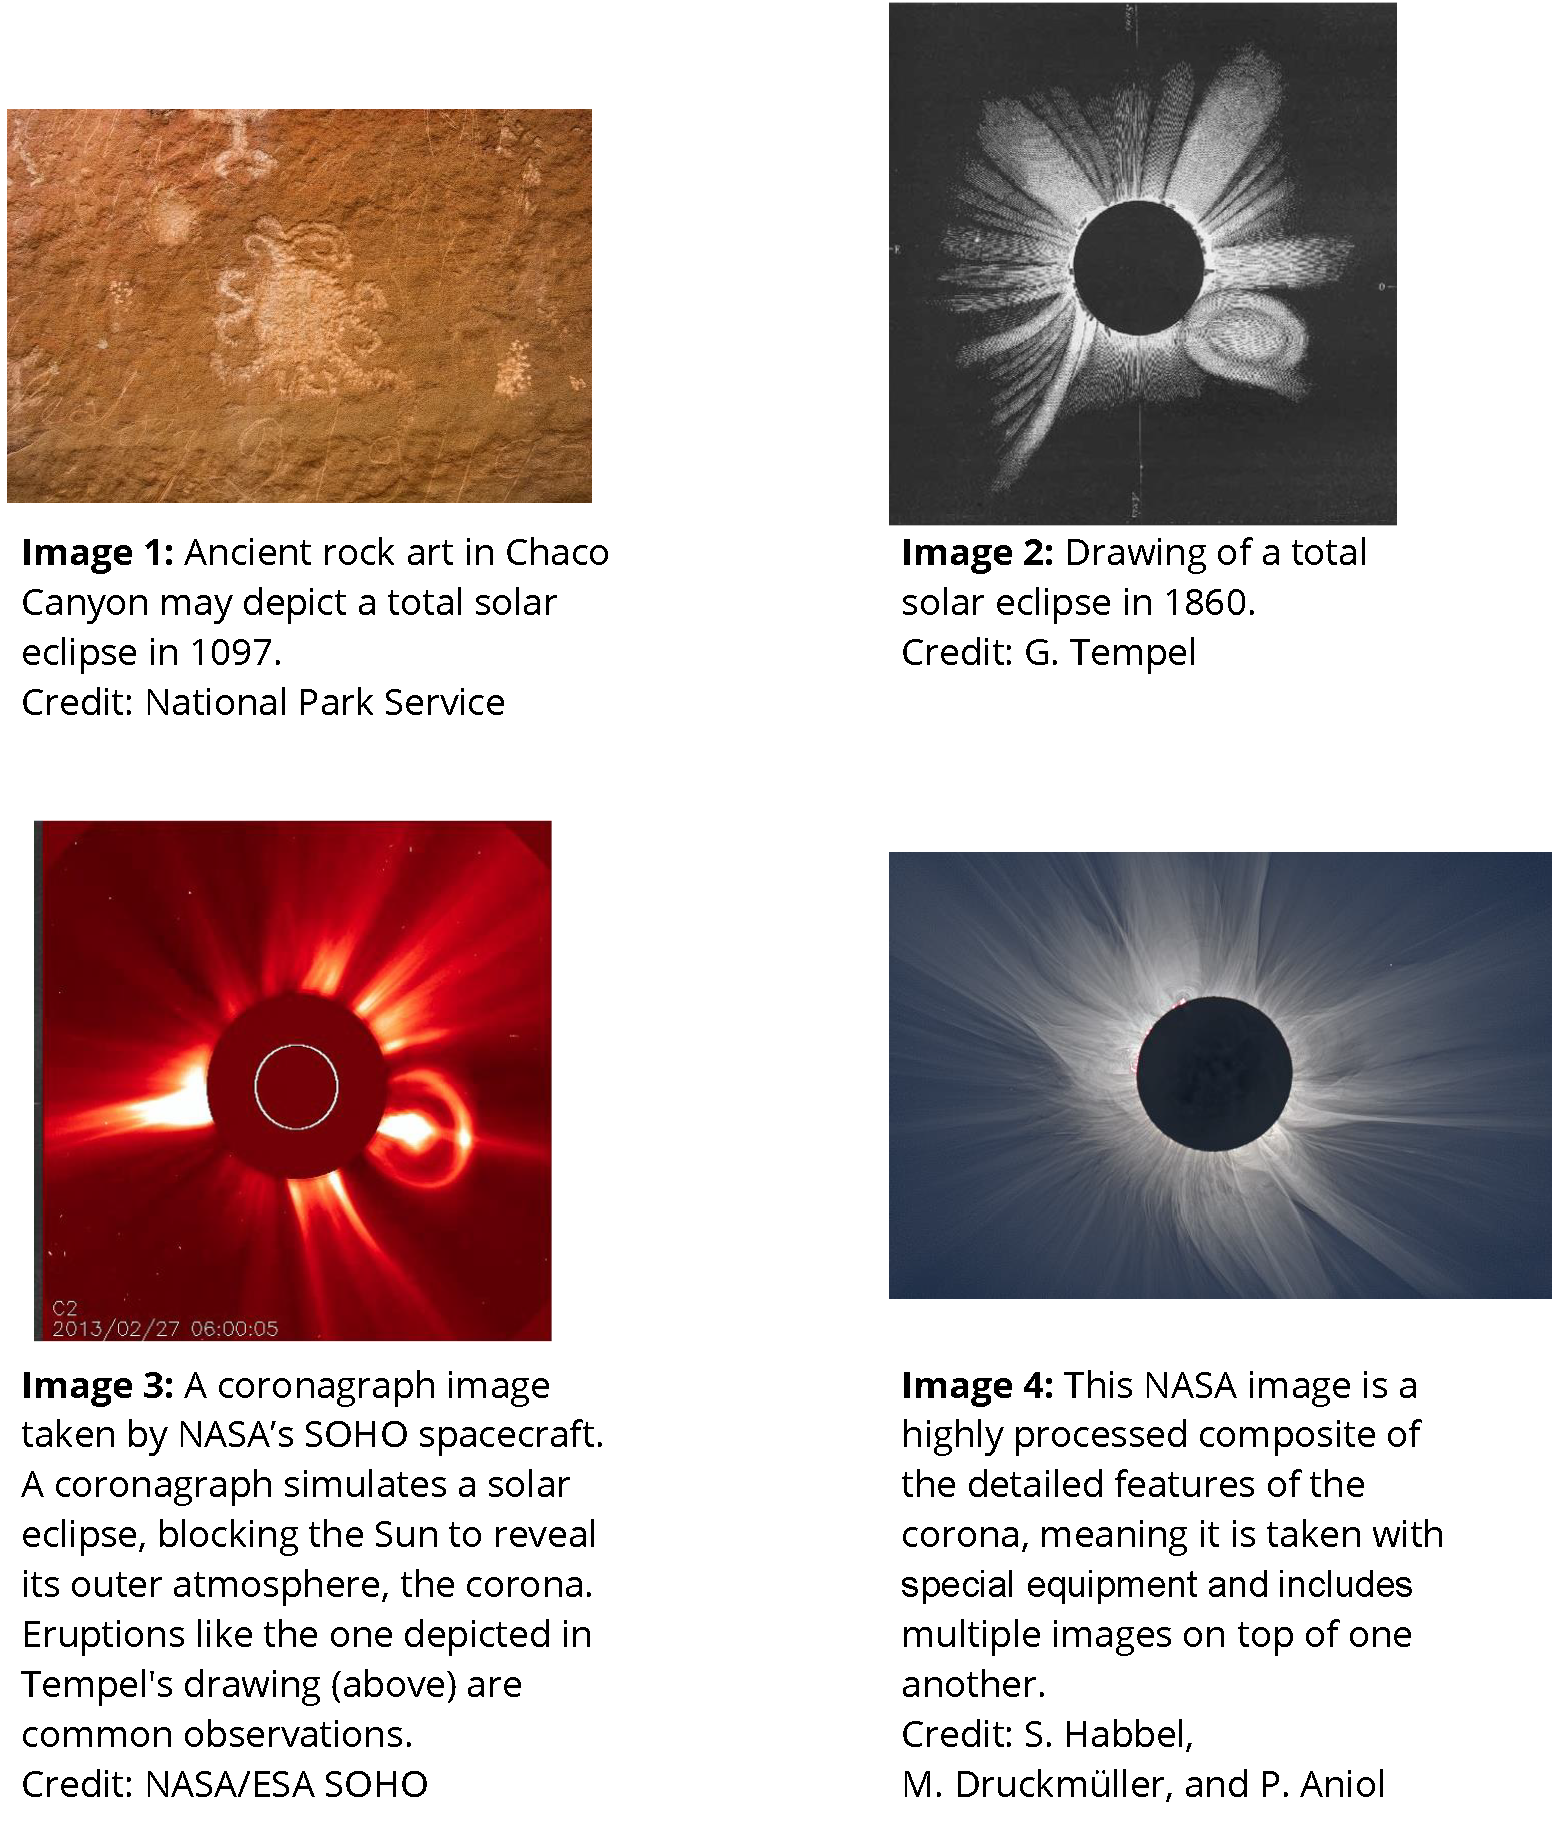 Different representations of the Sun's corona including carving, drawing, coronagraph image and a composite.